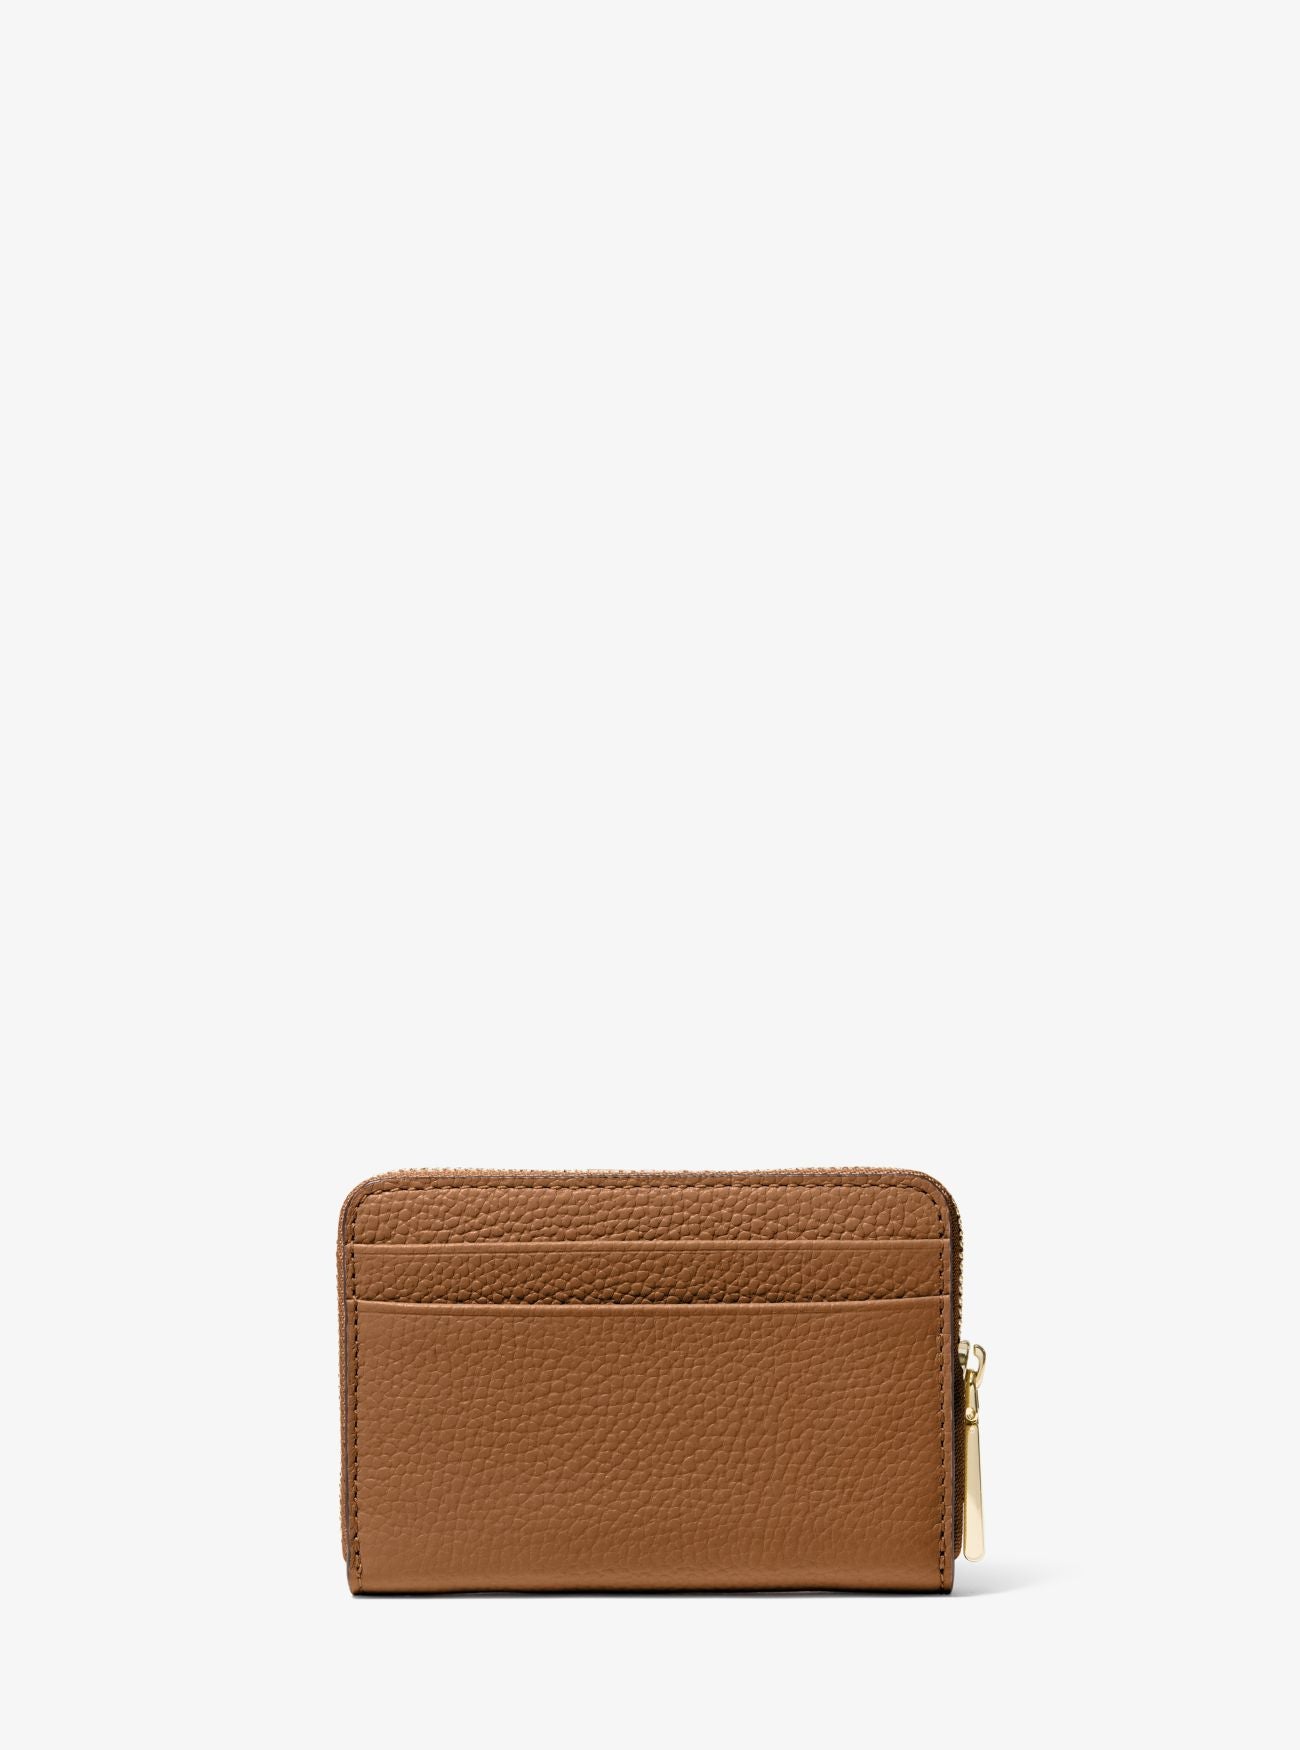 Jet Set Small Pebbled Leather Wallet - Luggage